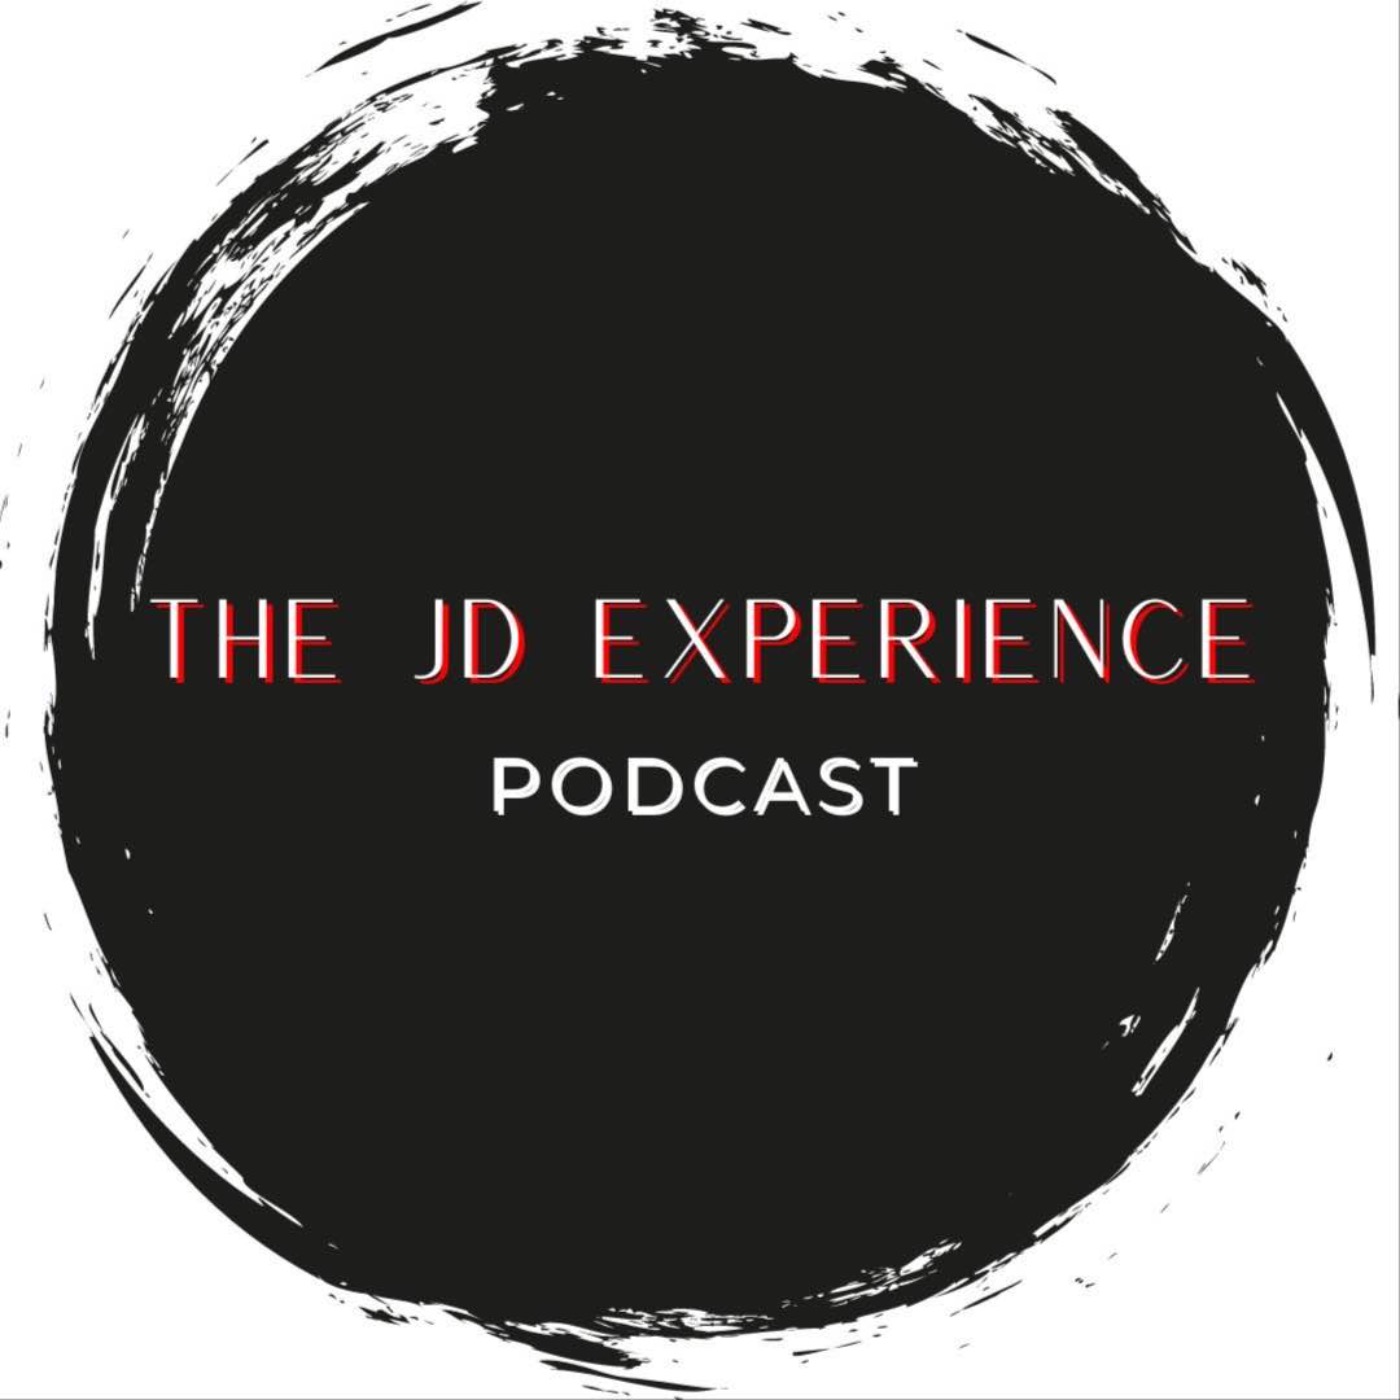 THE JD EXPERIENCE PODCAST EPISODE 13